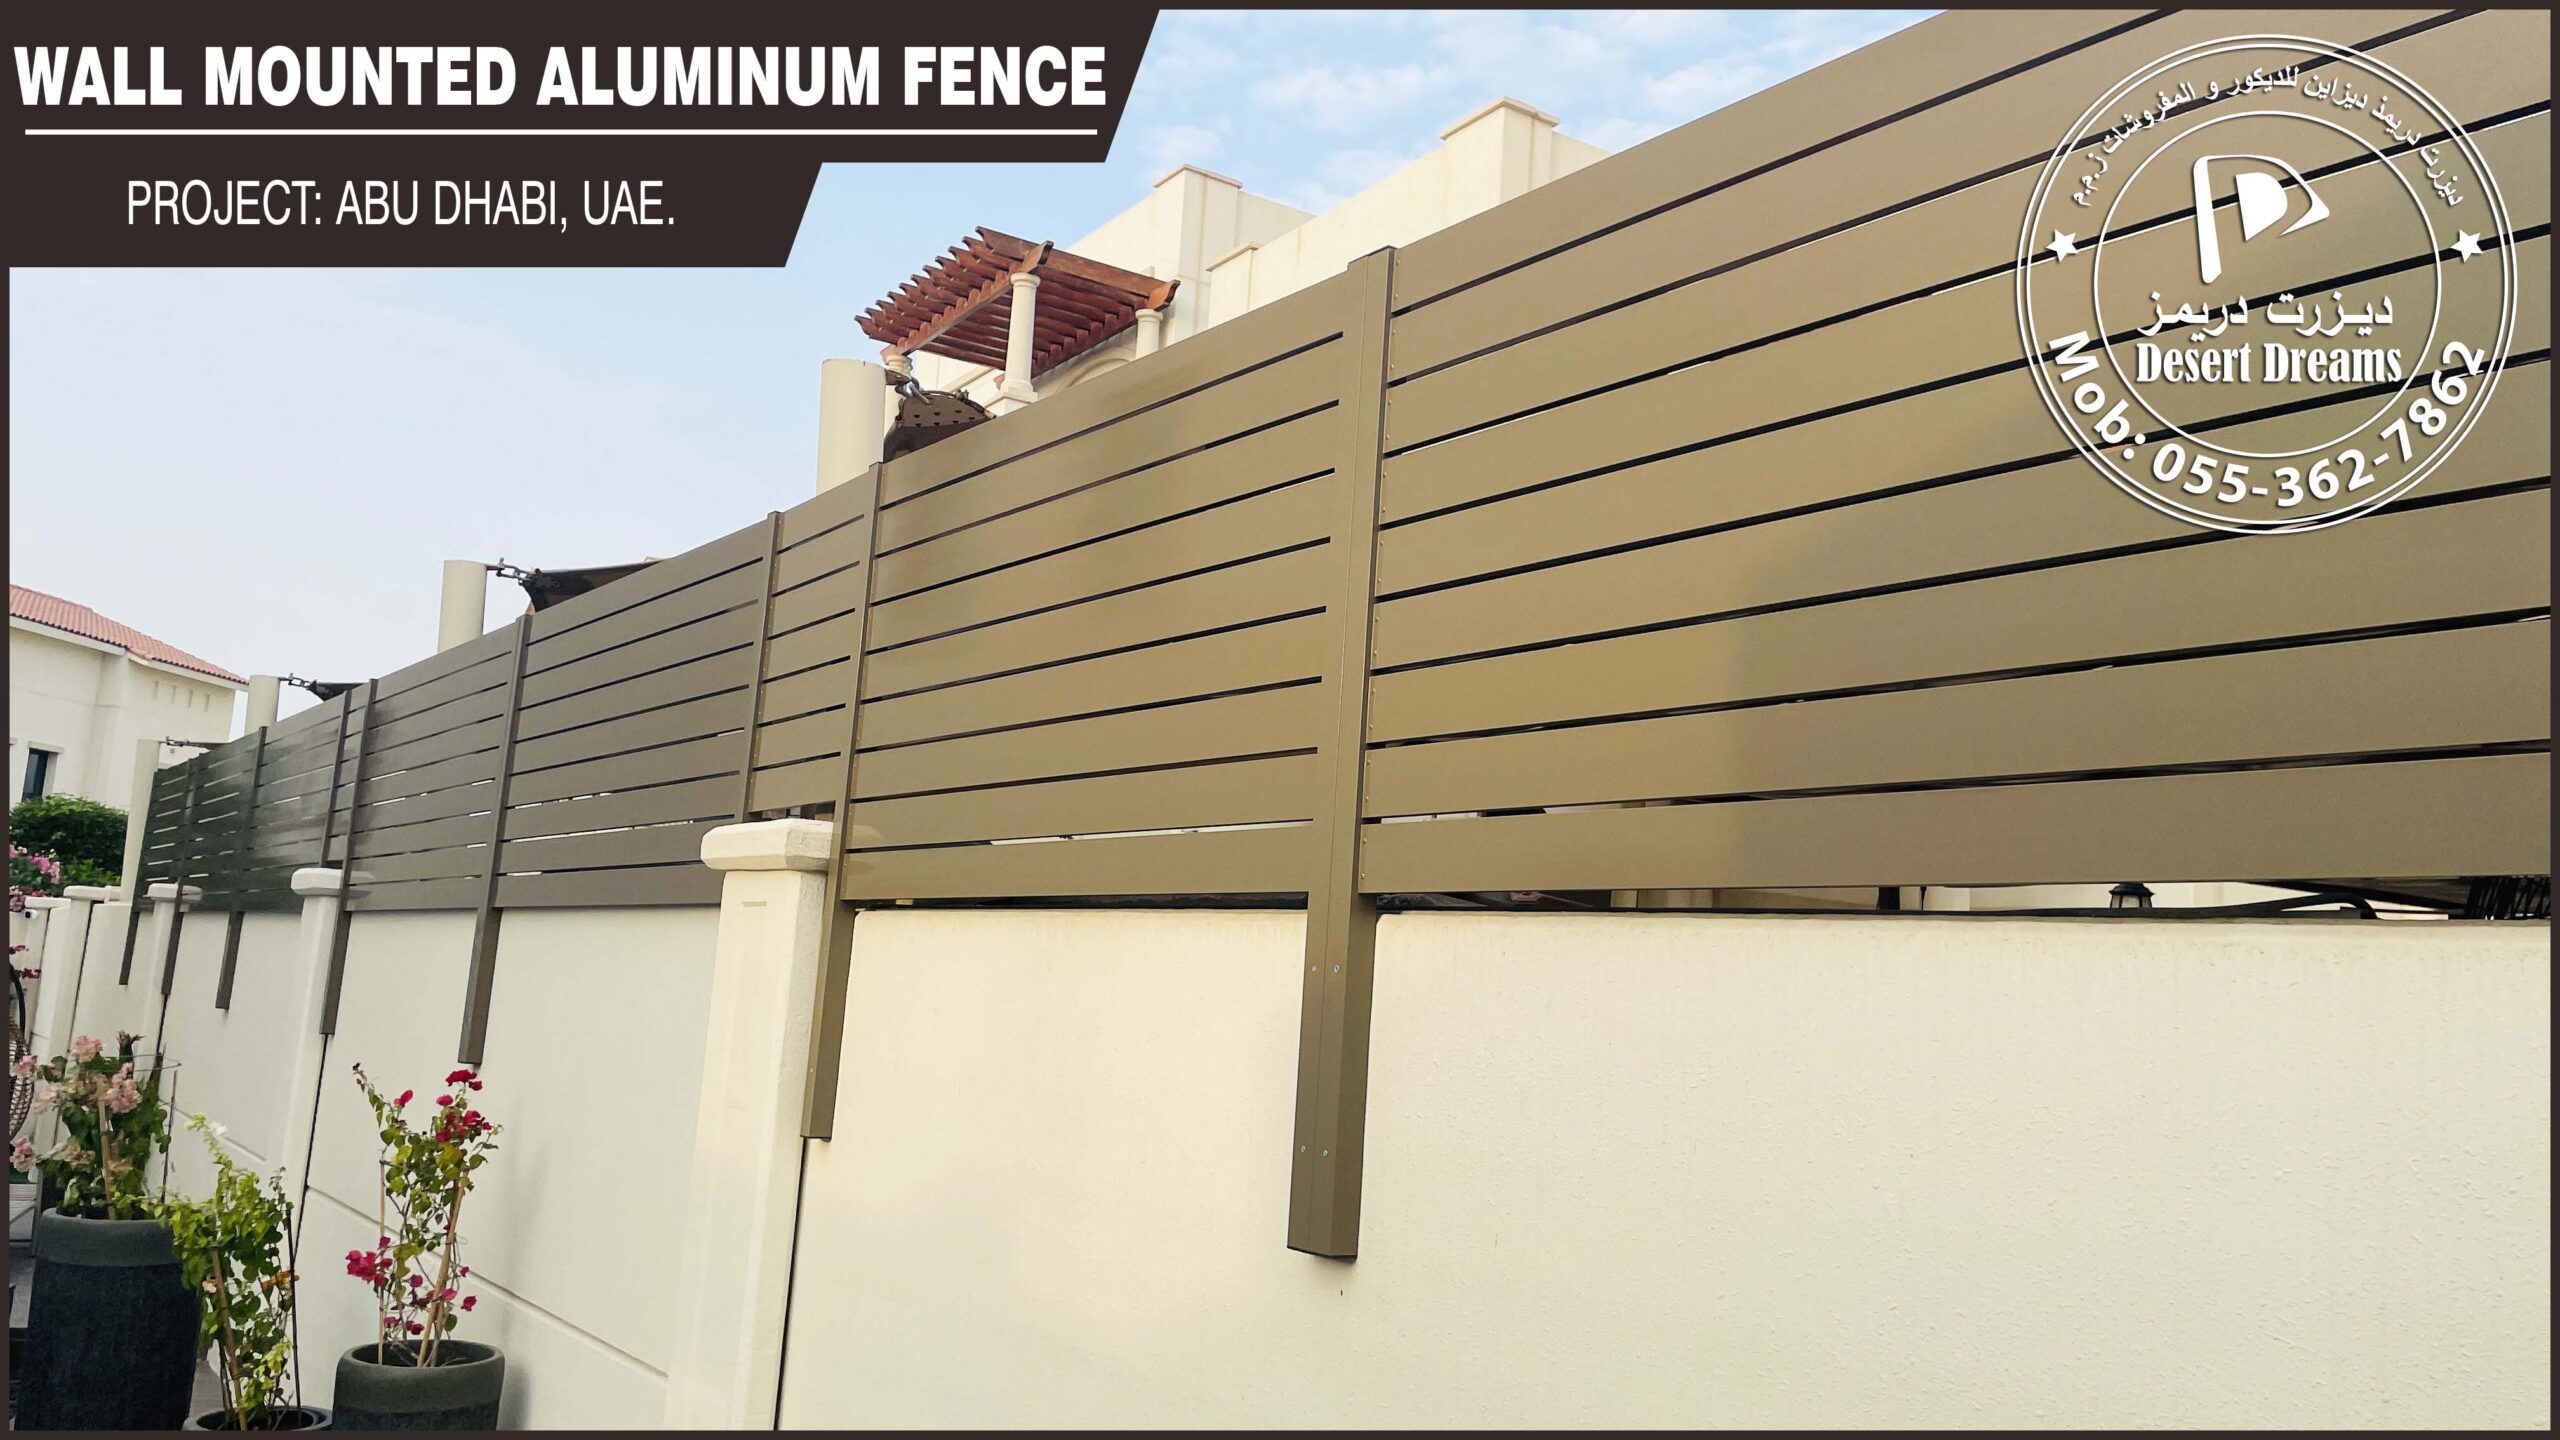 Wall Mounted Aluminum Fence and Doors in Uae | Privacy Panels.